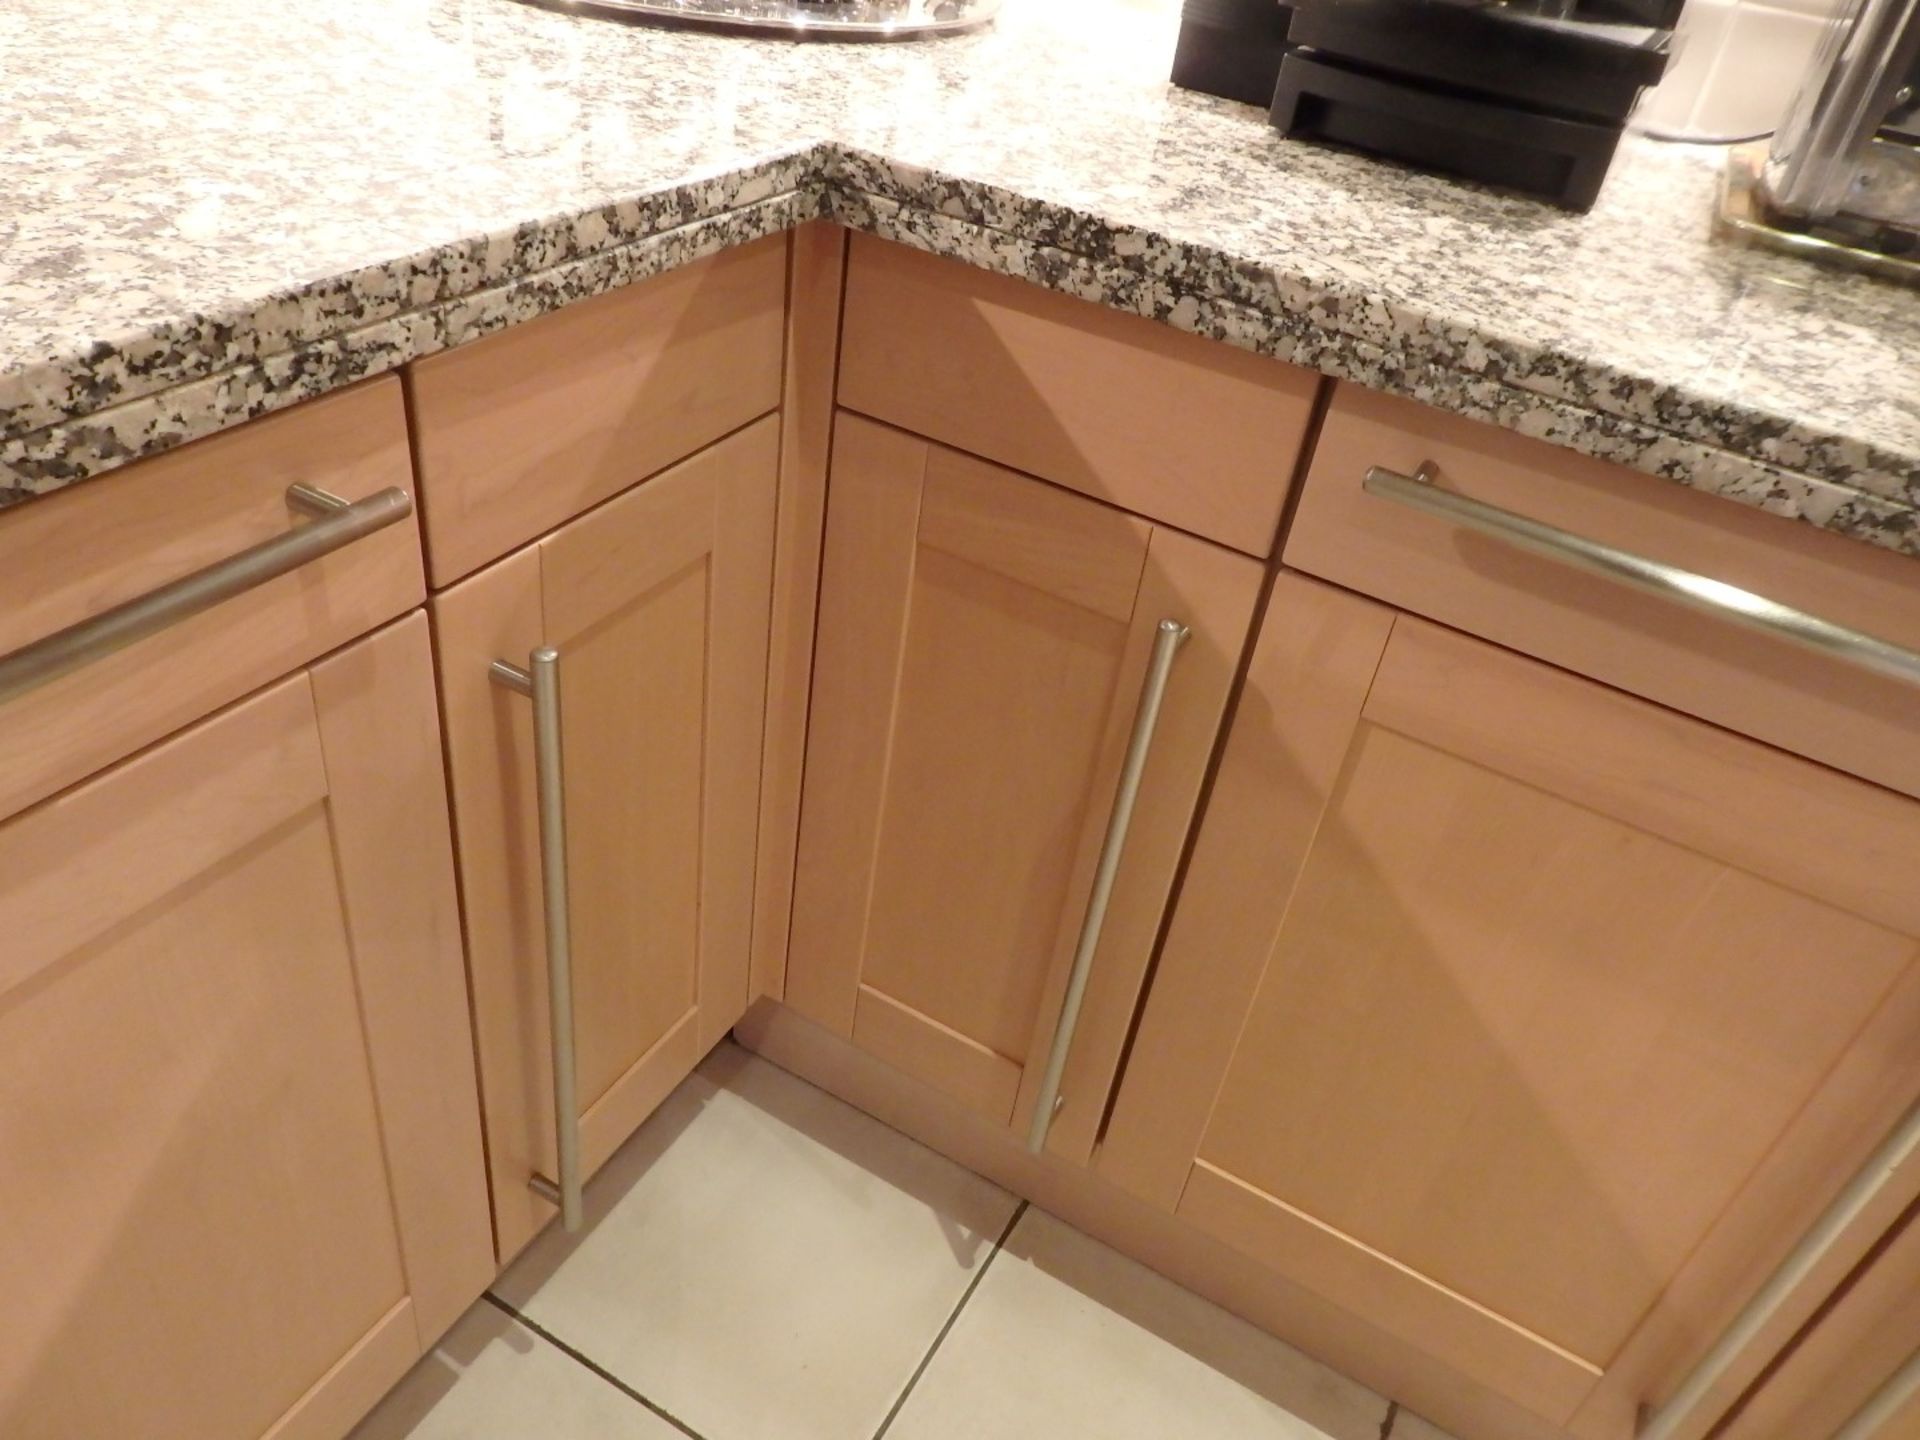 1 x Siematic Fitted Kitchen With Beech Shaker Style Doors, Granite Worktops, Central Island and - Image 52 of 148